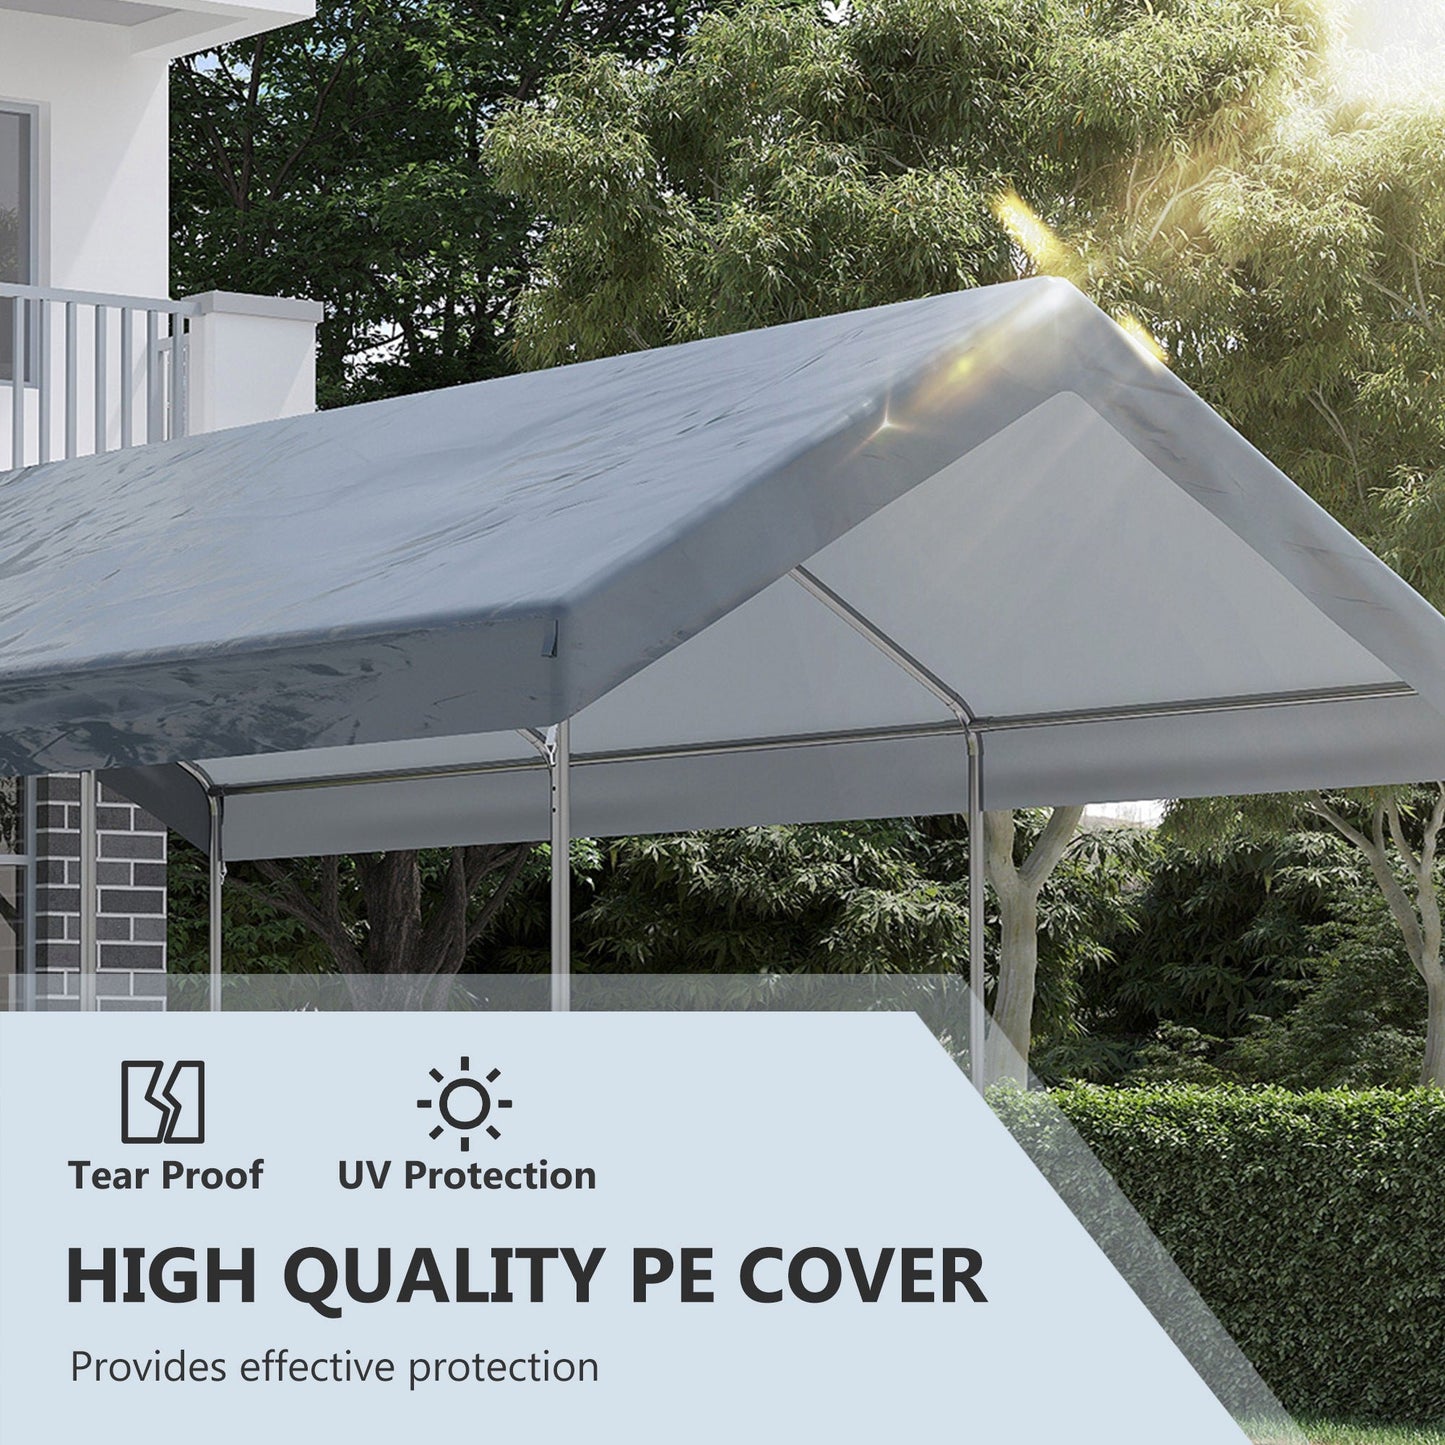 -Outsunny 10' x 20' Carport, Portable Garage & Patio Canopy Tent Storage Shelter, Adjustable Height, Anti-UV Cover for Car, Truck - Outdoor Style Company